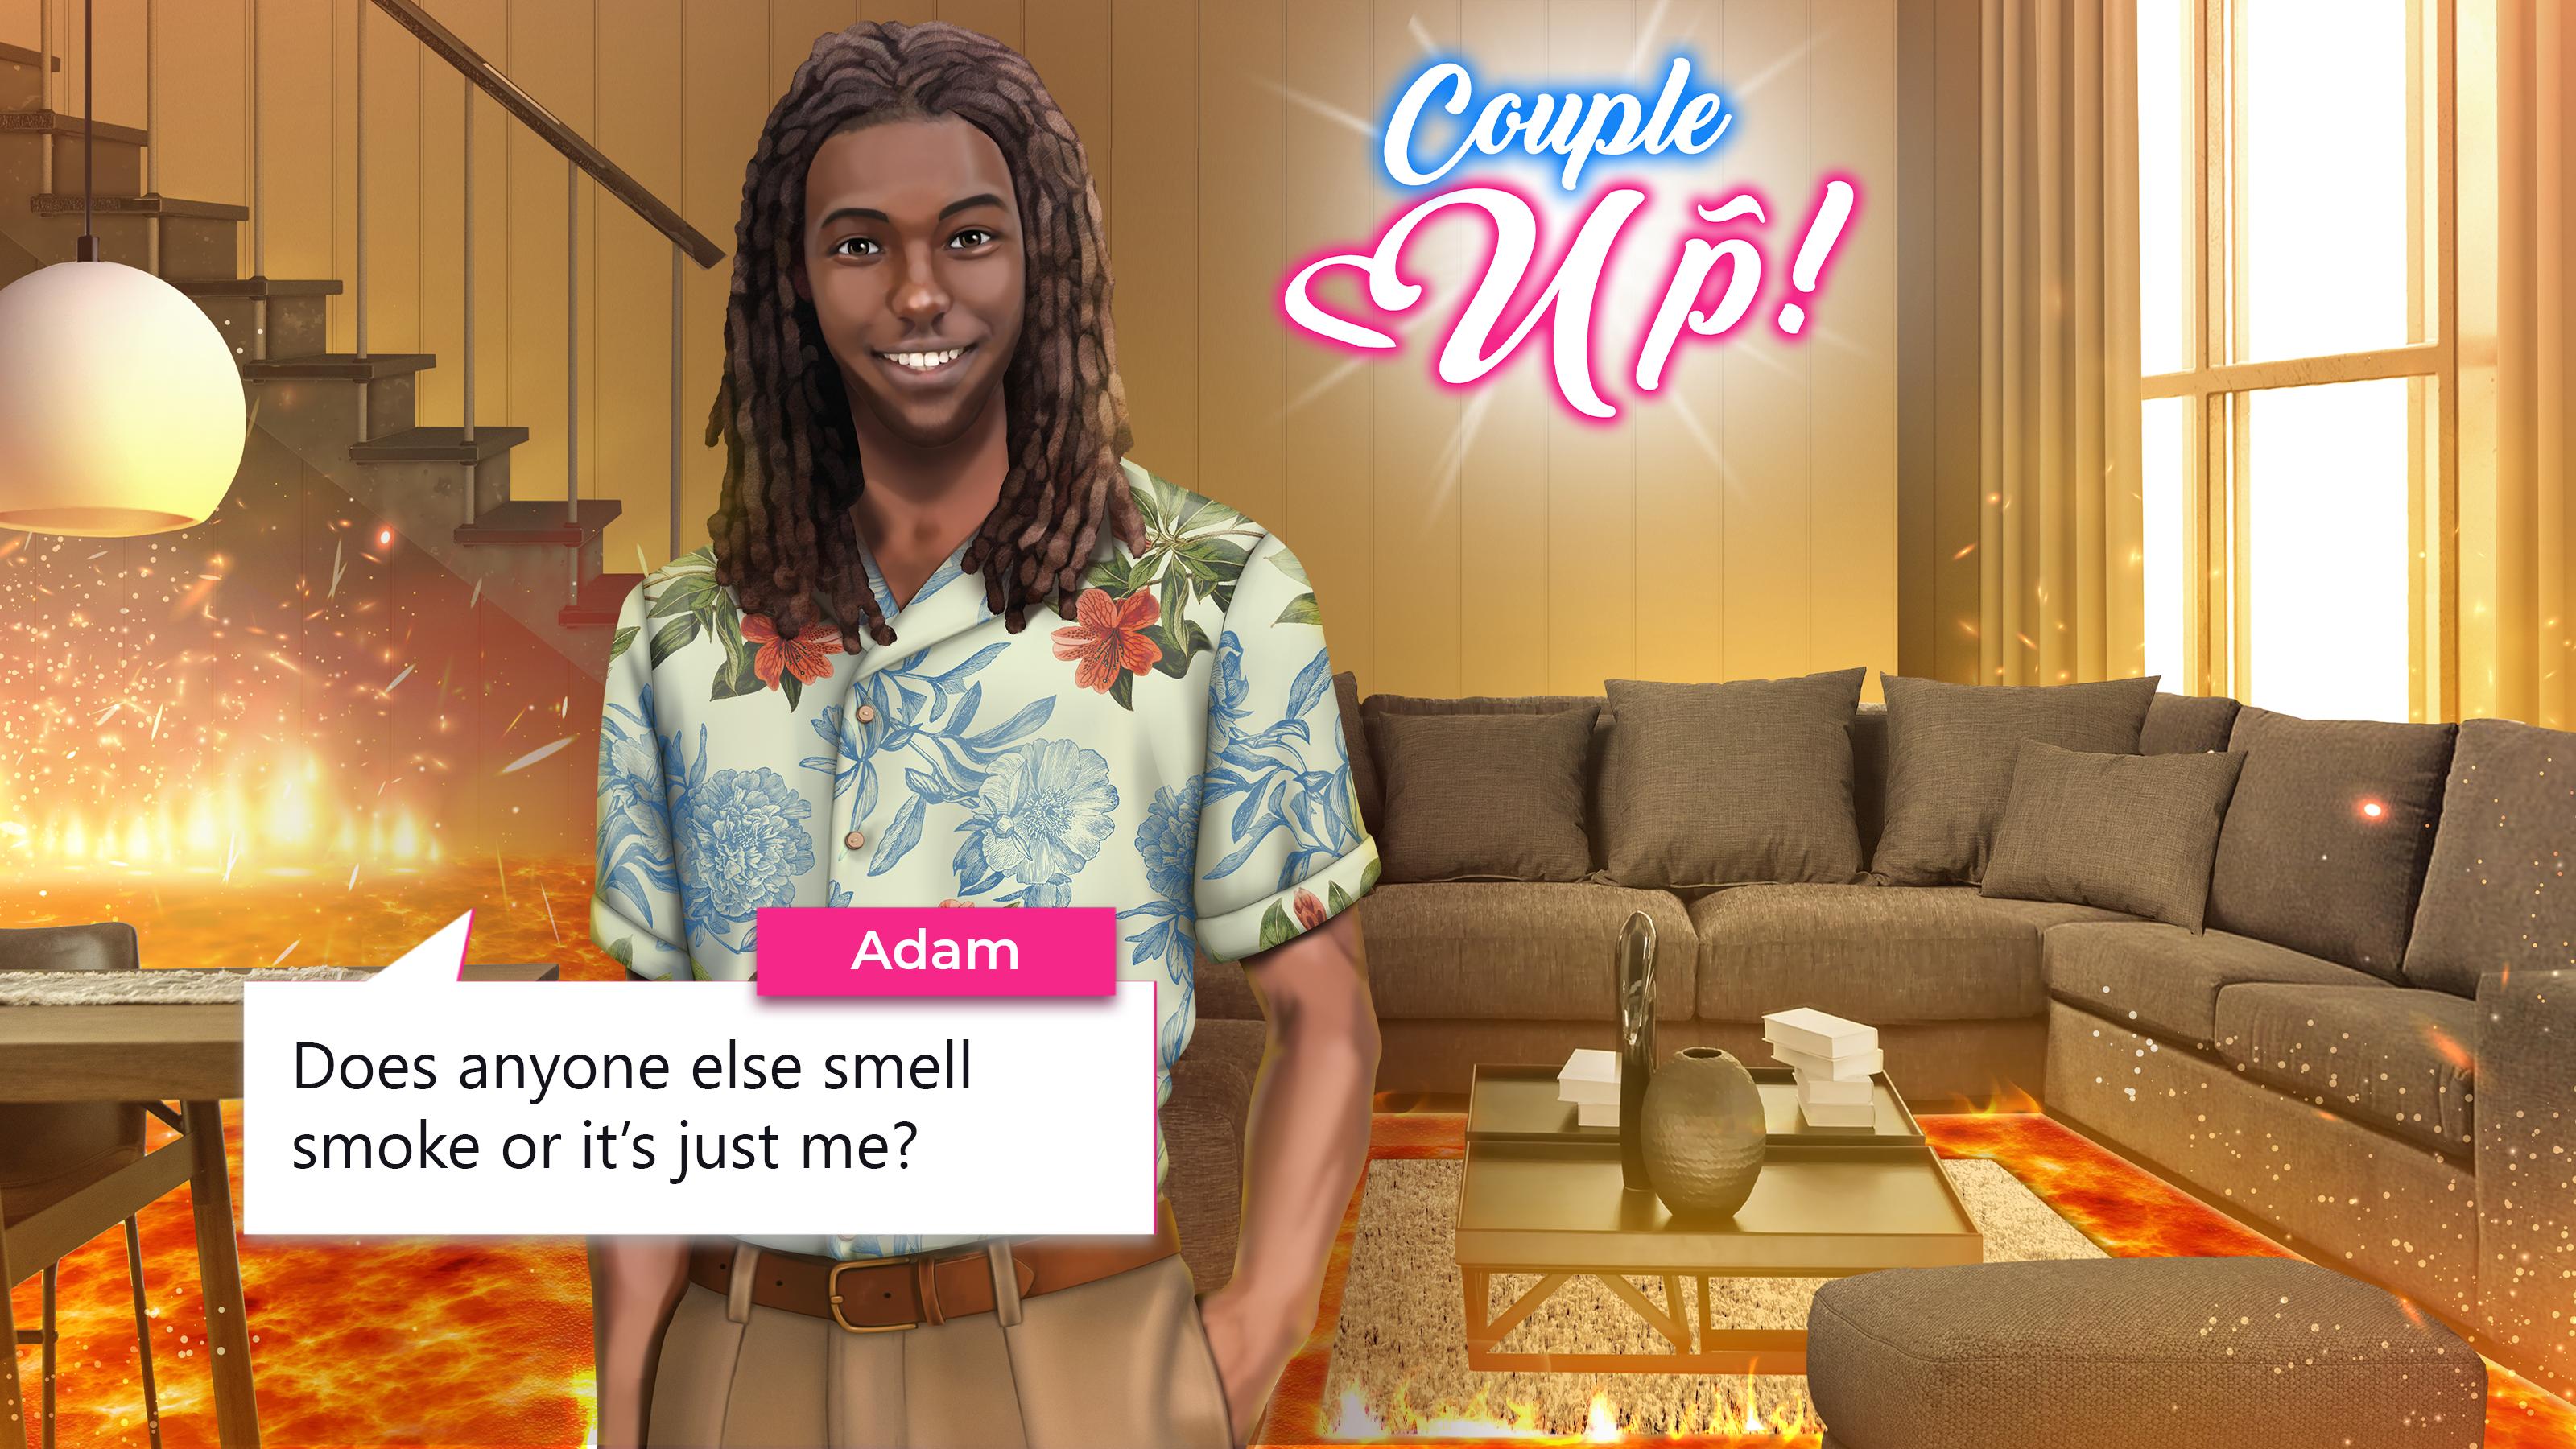 Couple Up! Love Show - Interactive Story 0.7.5 Screenshot 8